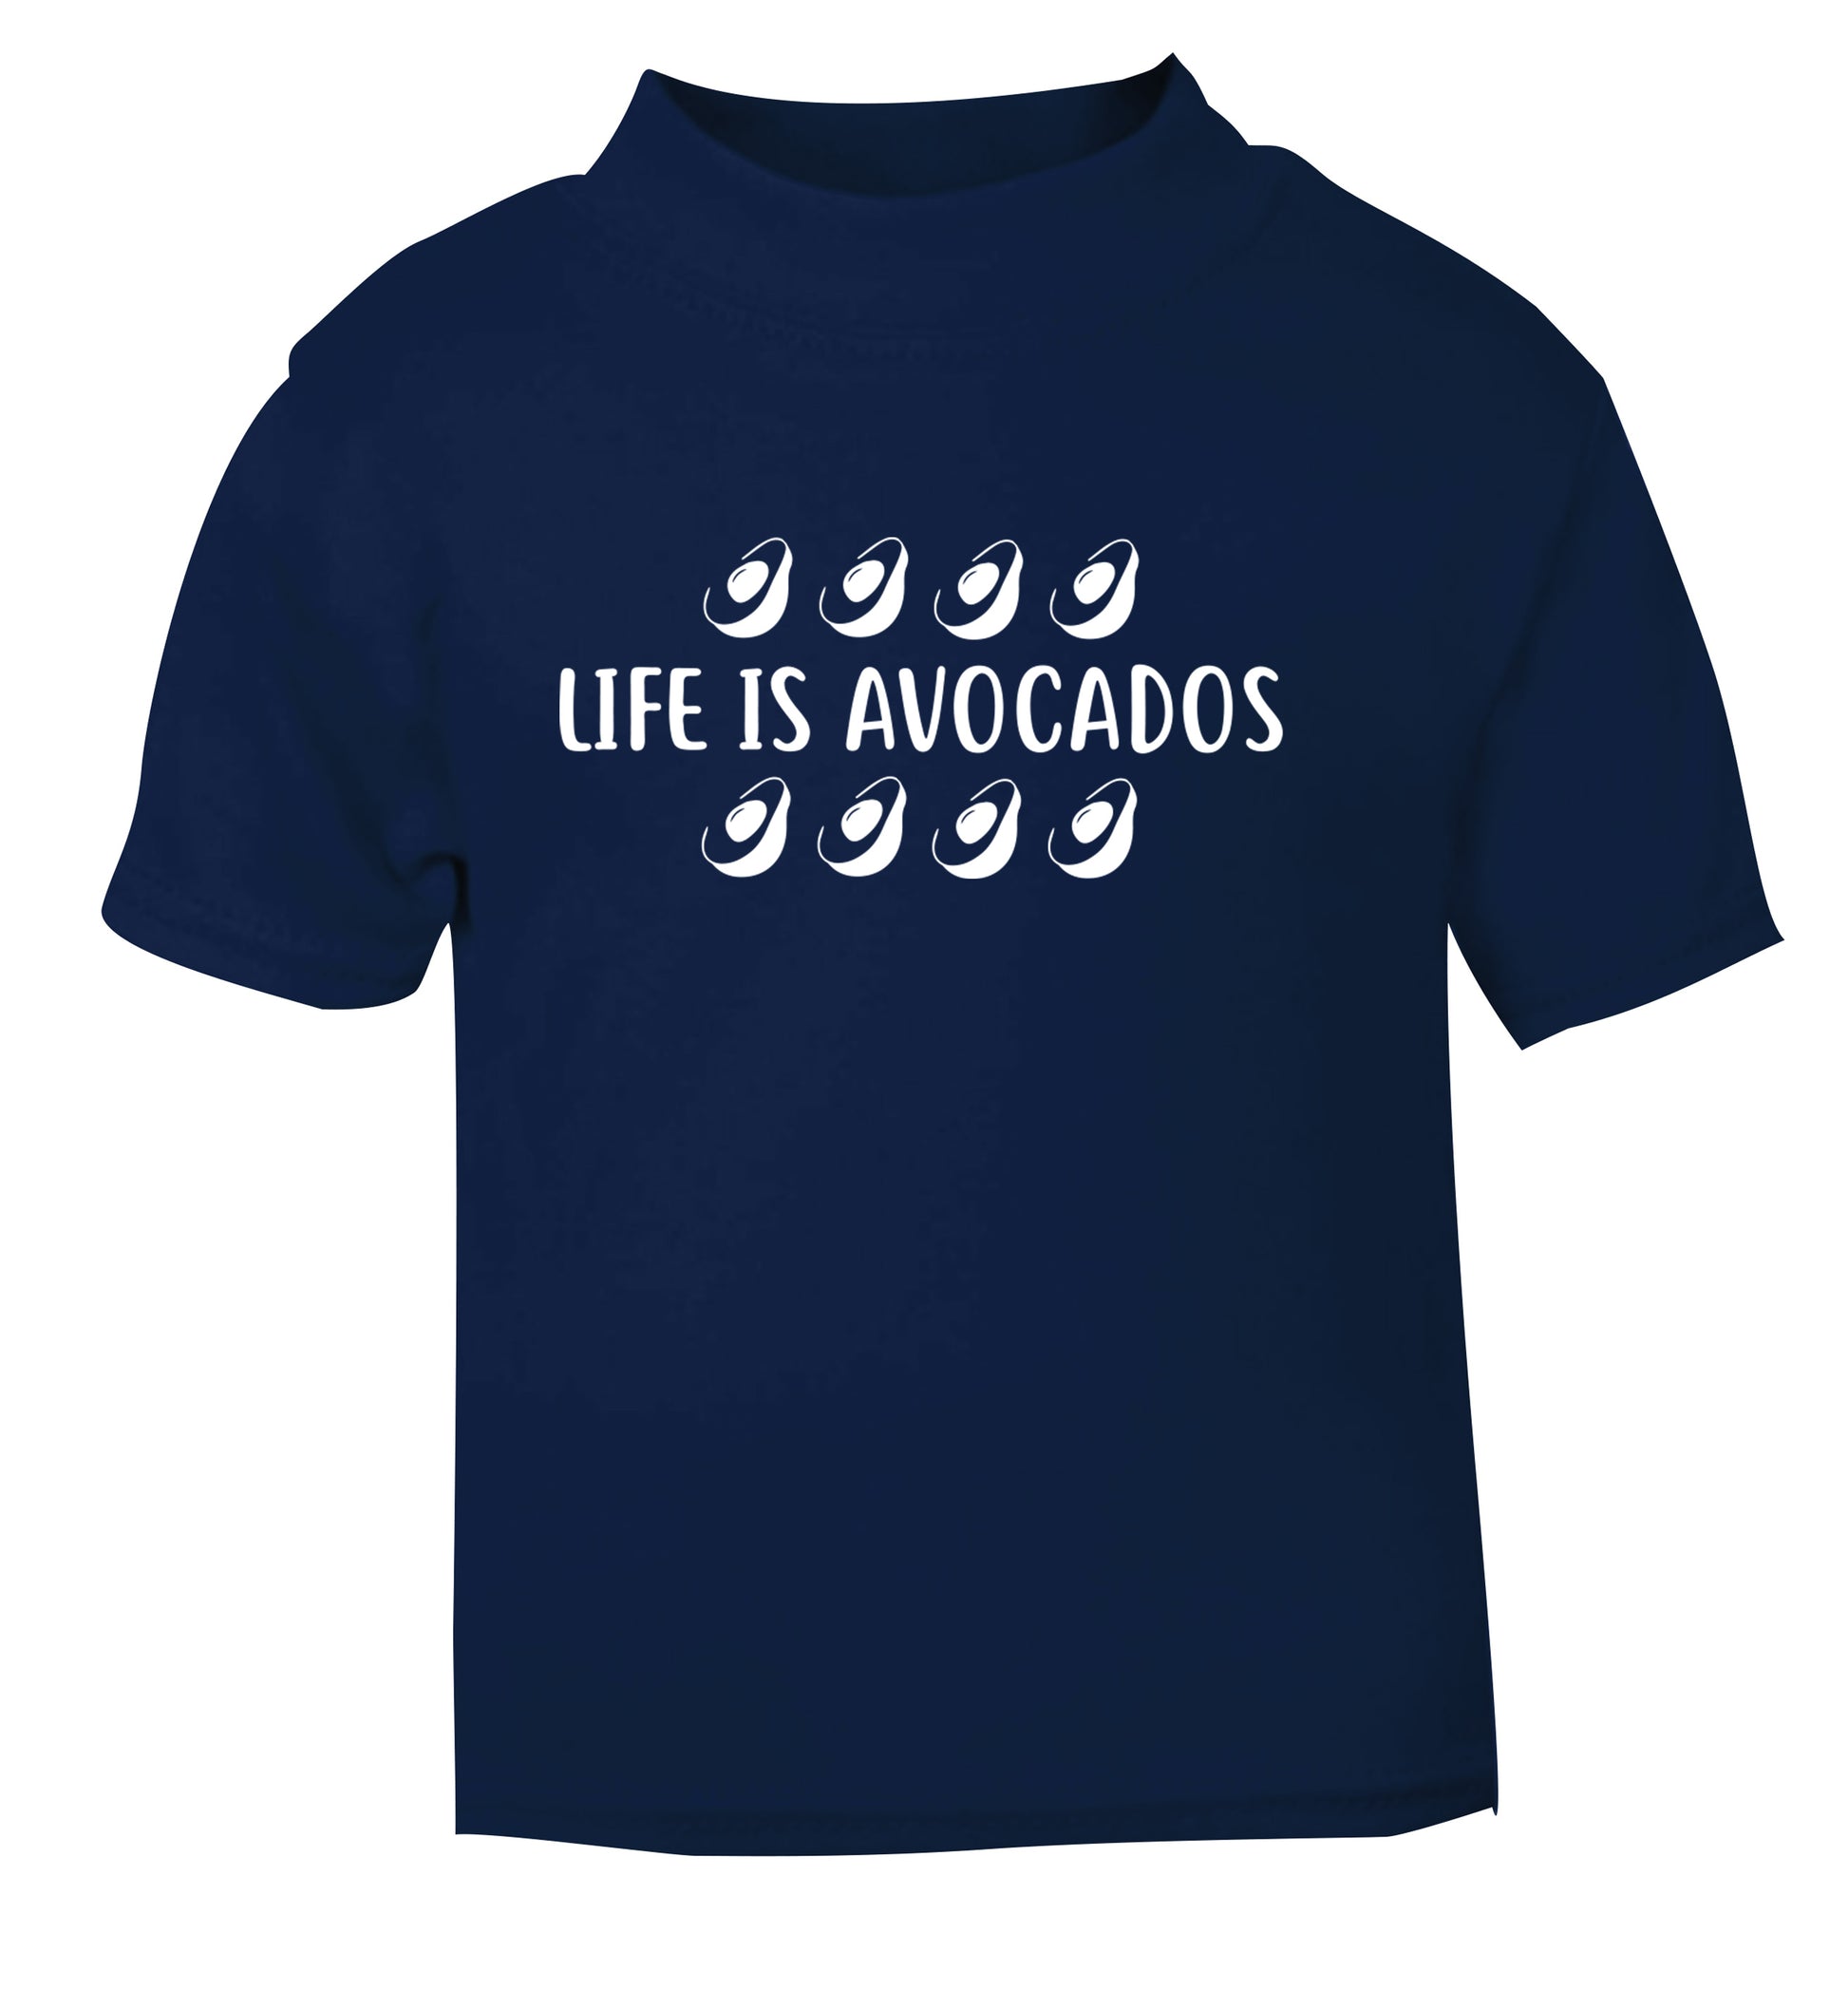 Life is avocados navy Baby Toddler Tshirt 2 Years